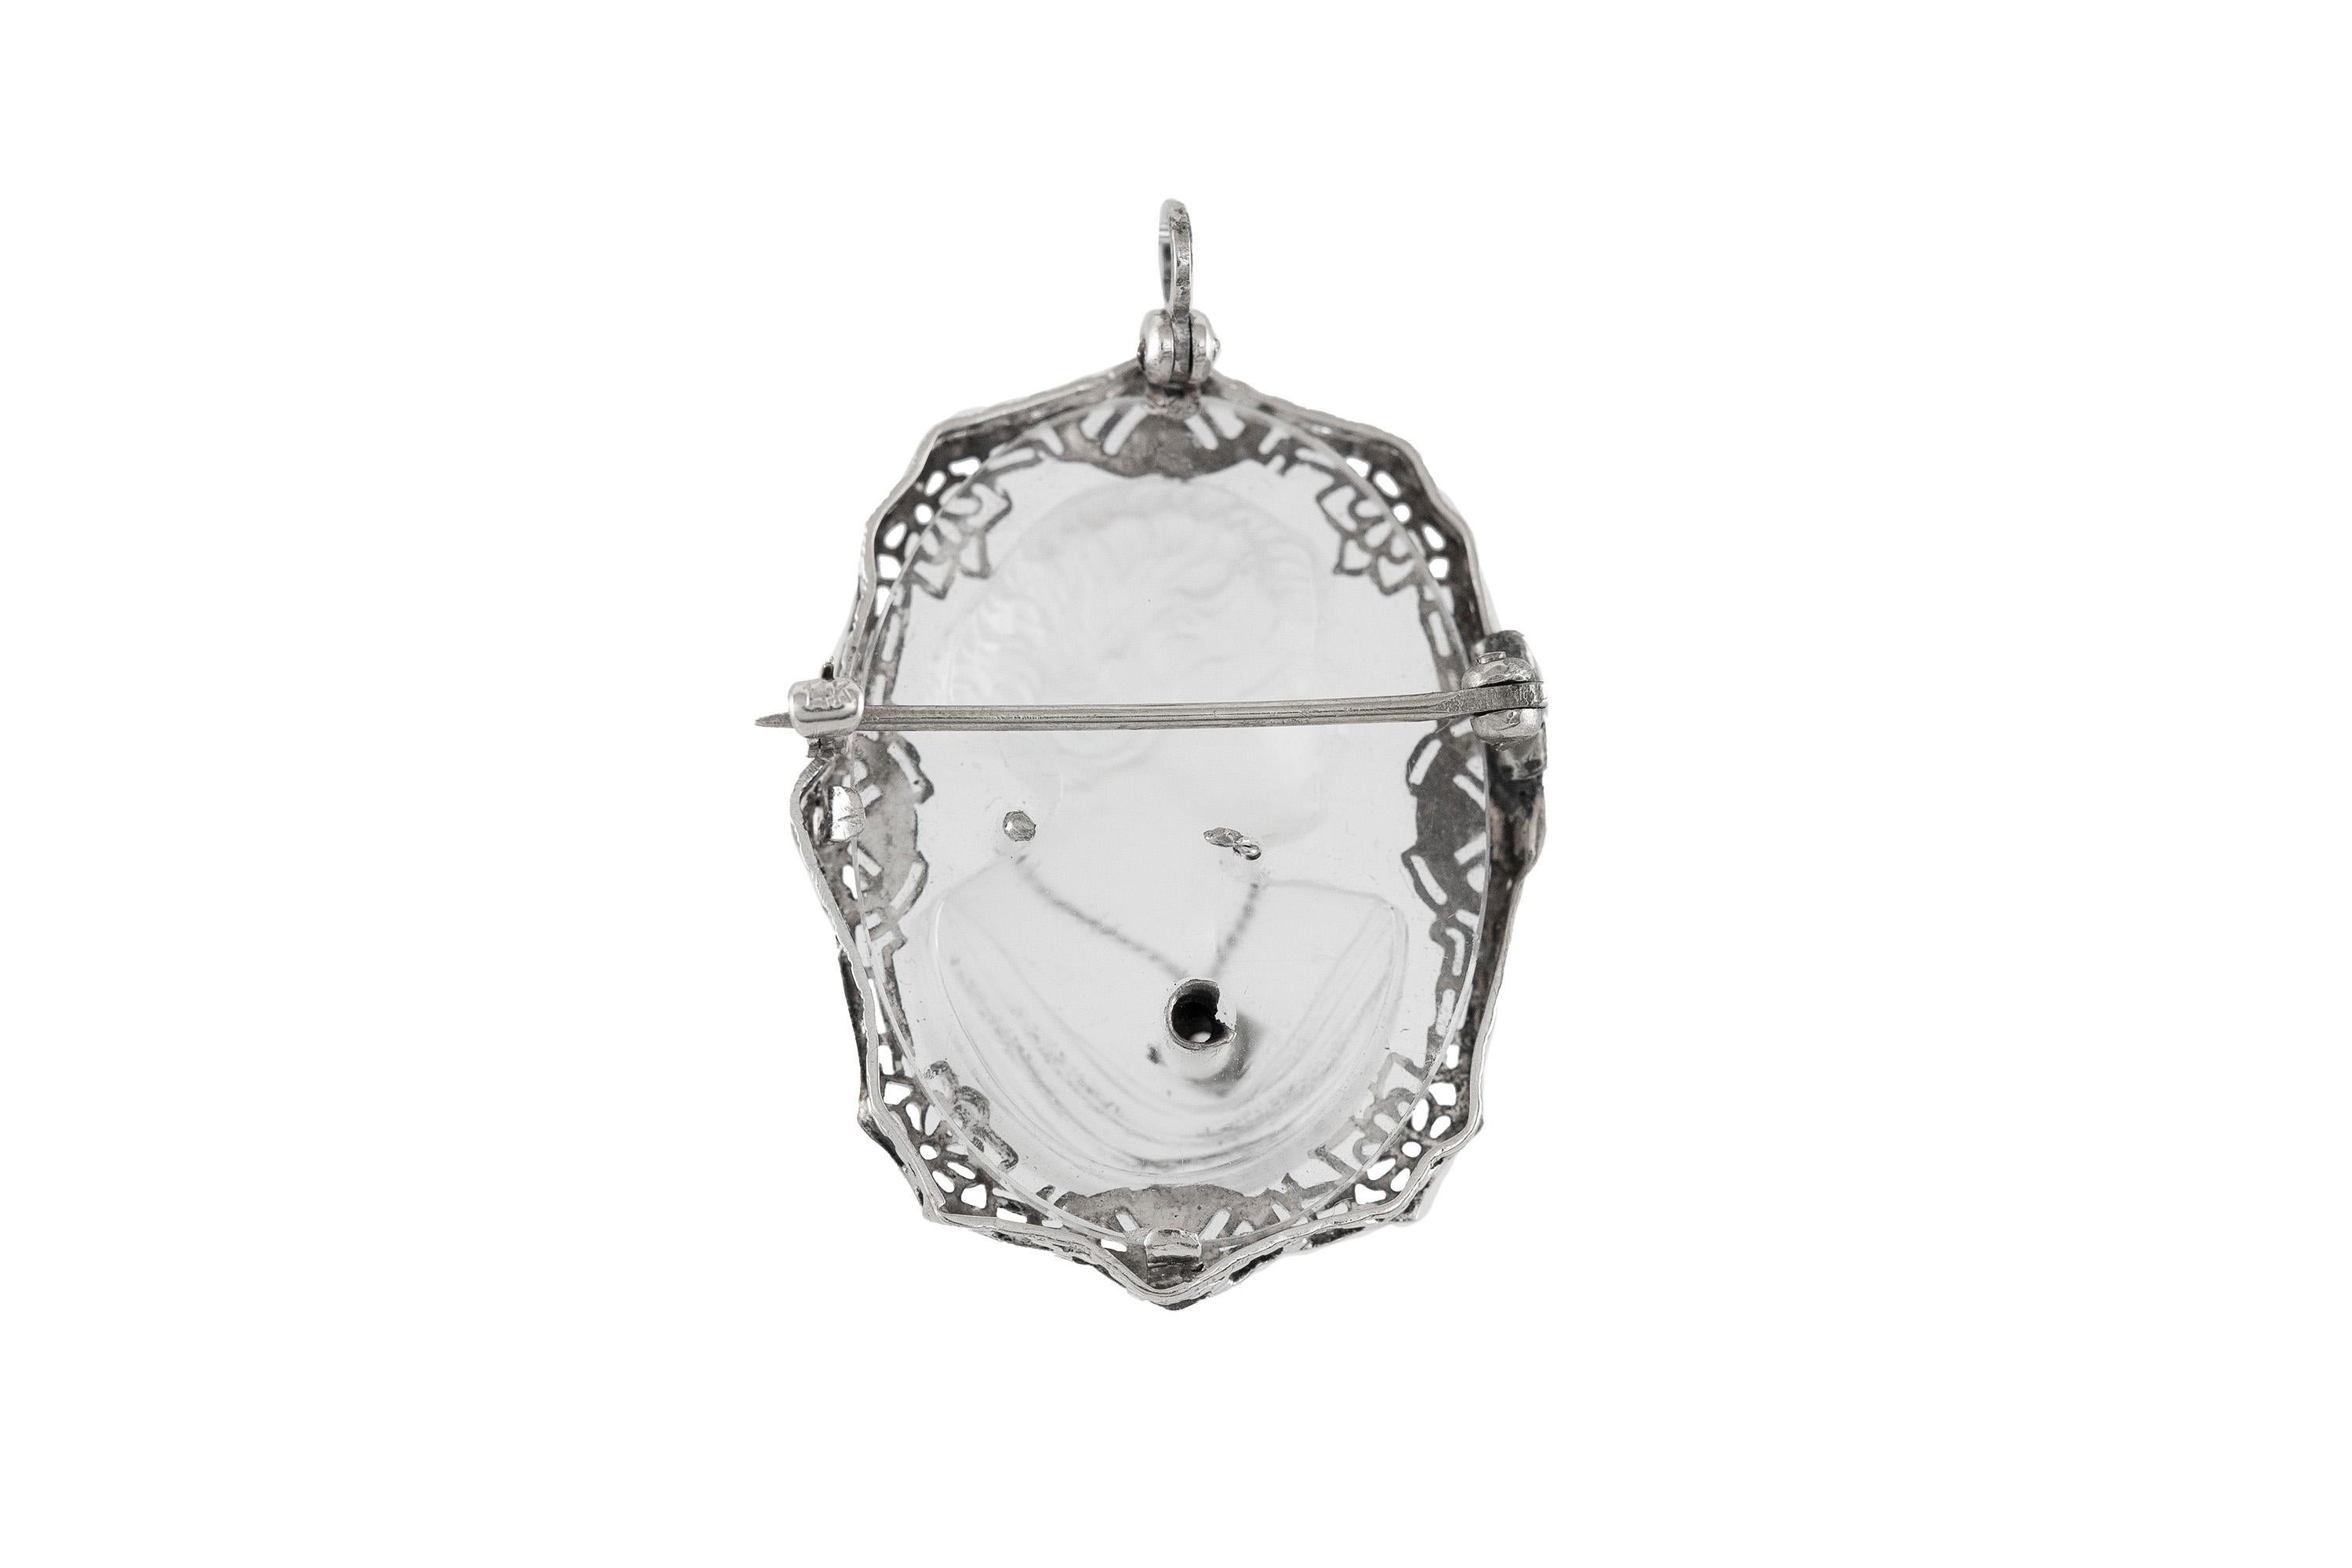 The pendannt is finely crafted in 14k white gold with carved crystal and one center diamond weighing approximately total of 0.05 carat.
Circa 1910.